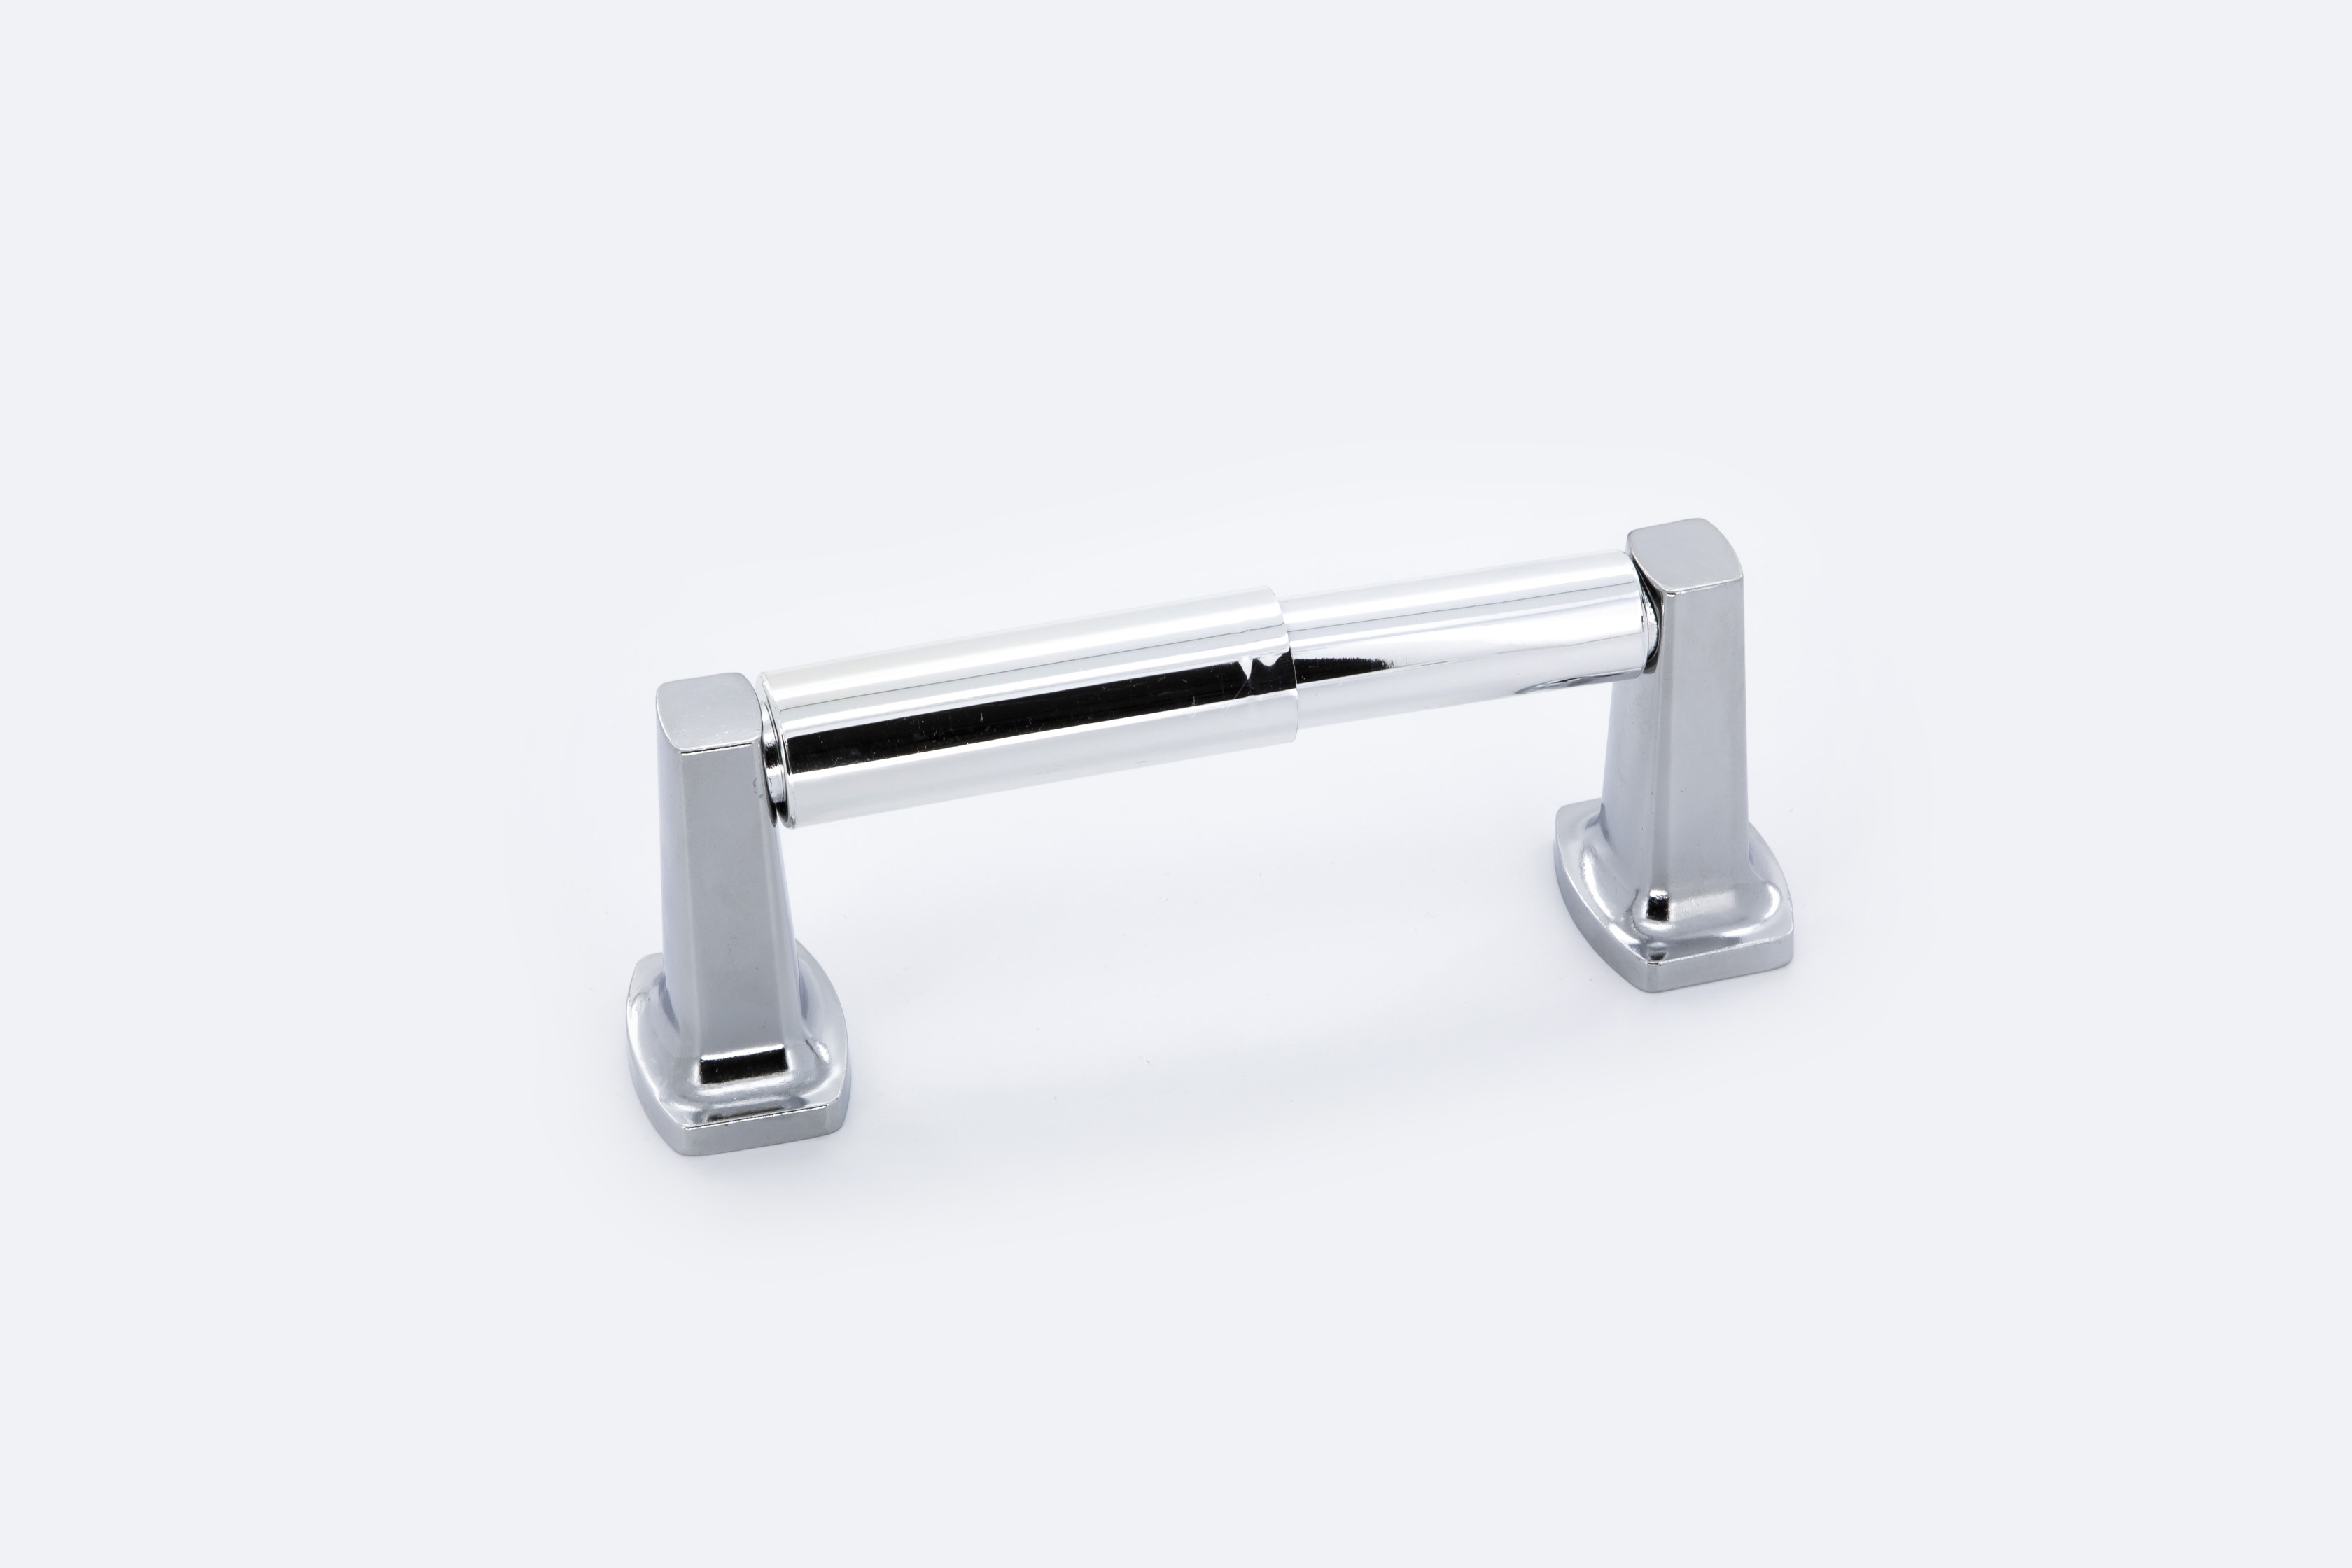 Mainstays Wall Mounted Toilet Paper Holder, Chrome Plating Finish